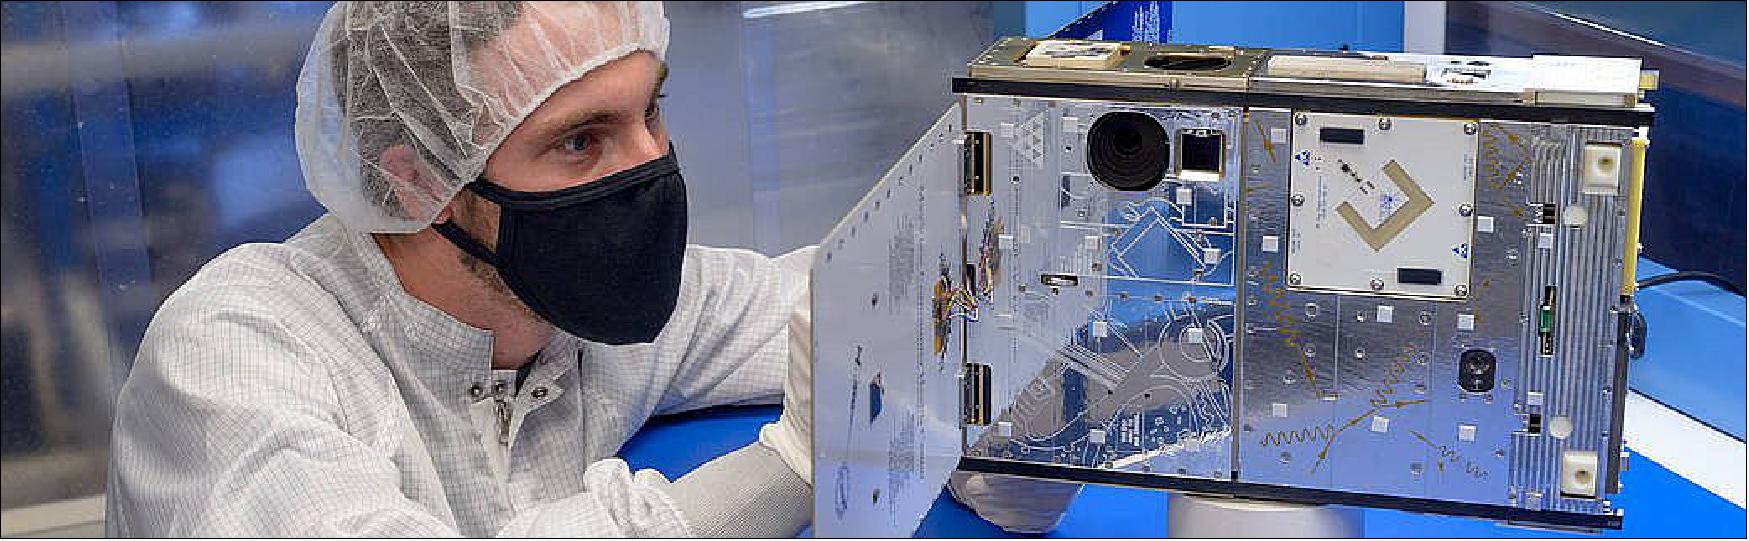 Figure 15: Connor Nelson, PACE flight software lead at NASA's Ames Research Center in California's Silicon Valley, performs a visual inspection of the PACE-1 6U CubeSat during testing (image credit: NASA/Ames Research Center/Dominic Hart)